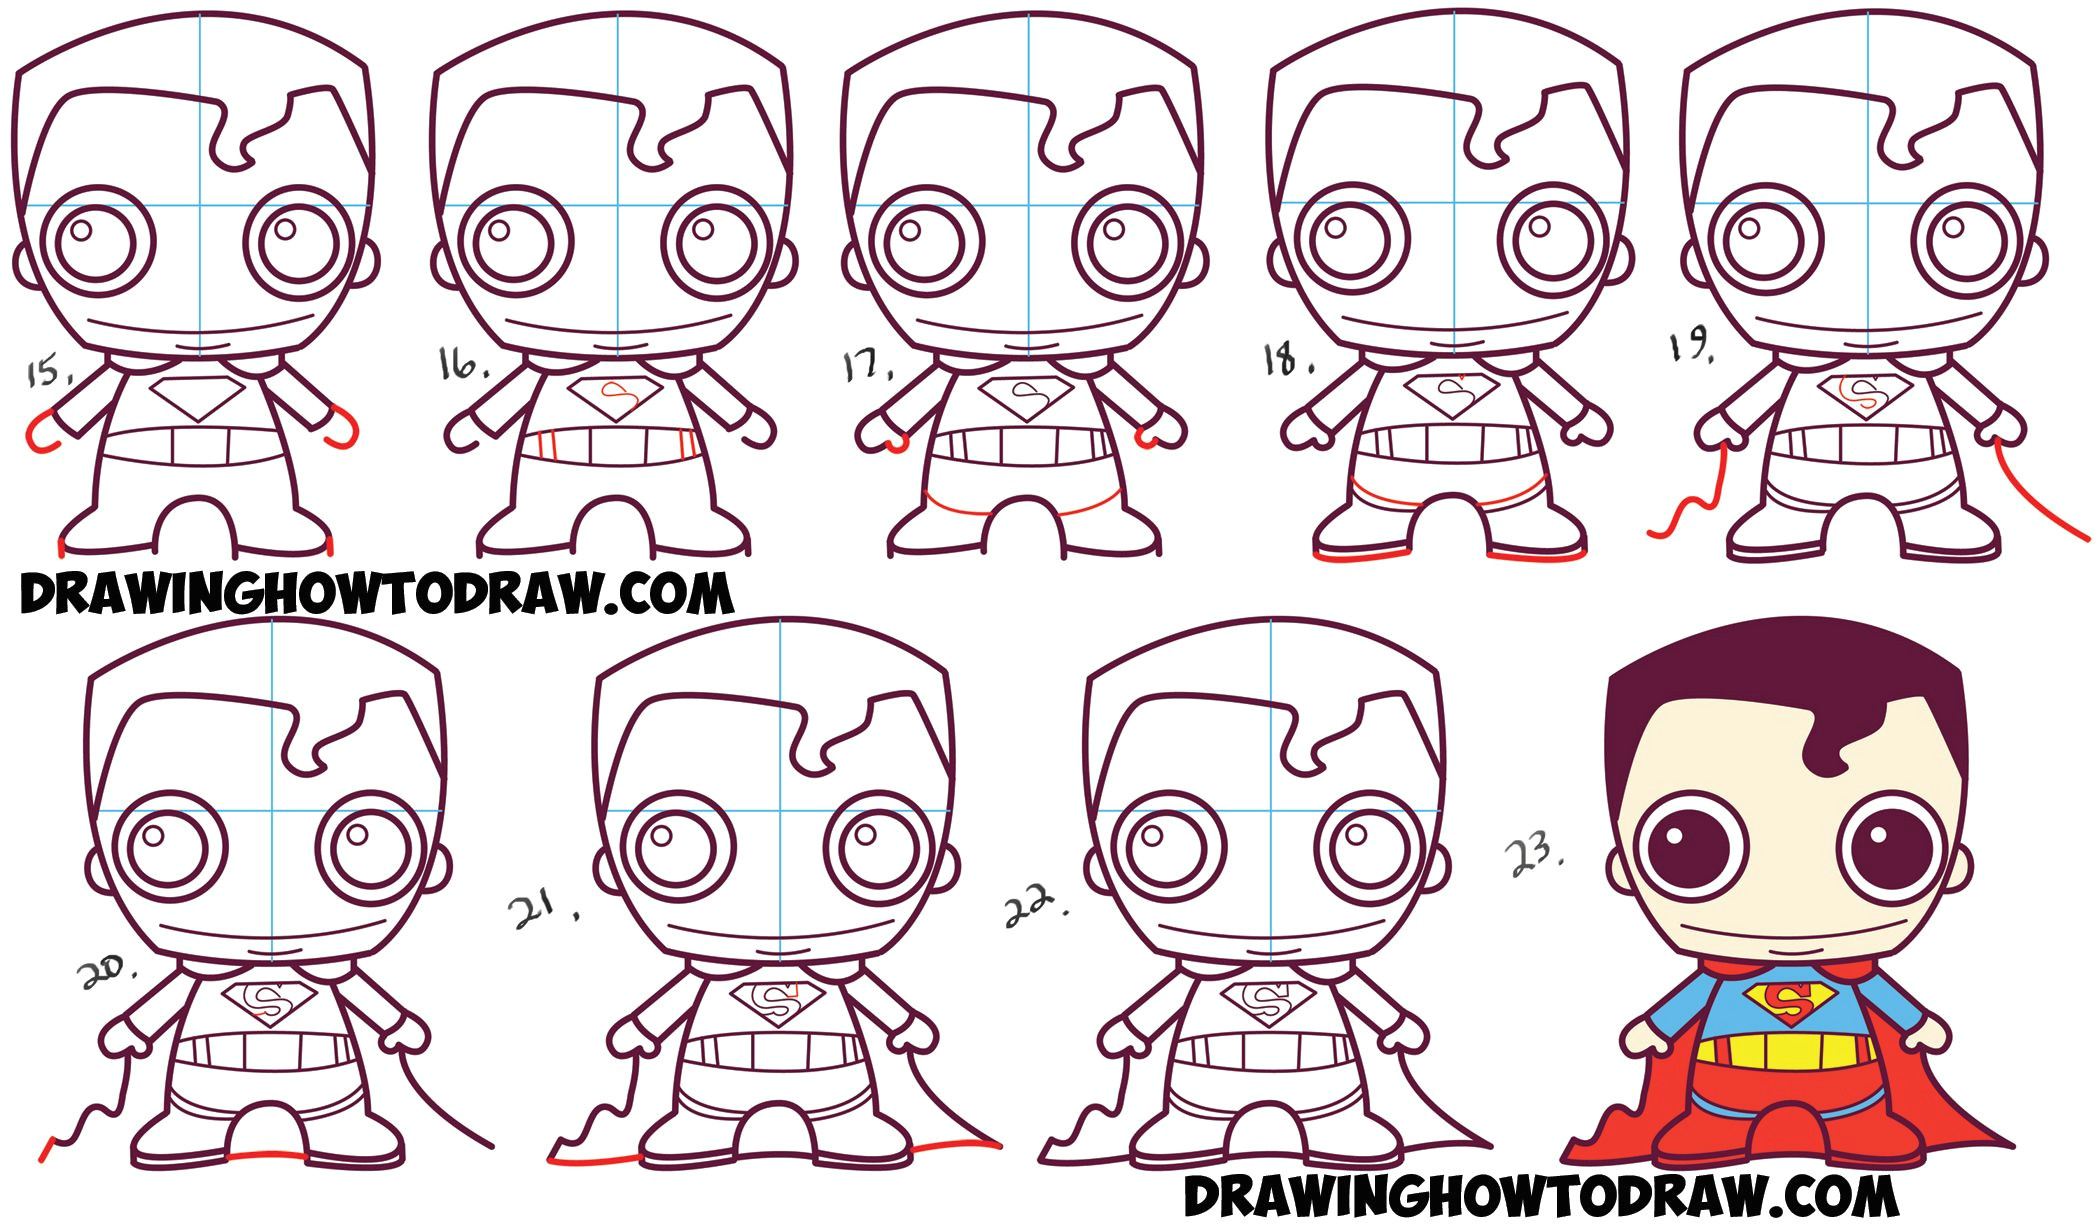 learn how to draw cute chibi baby kawaii superman from dc comics in simple steps drawing lesson for kids